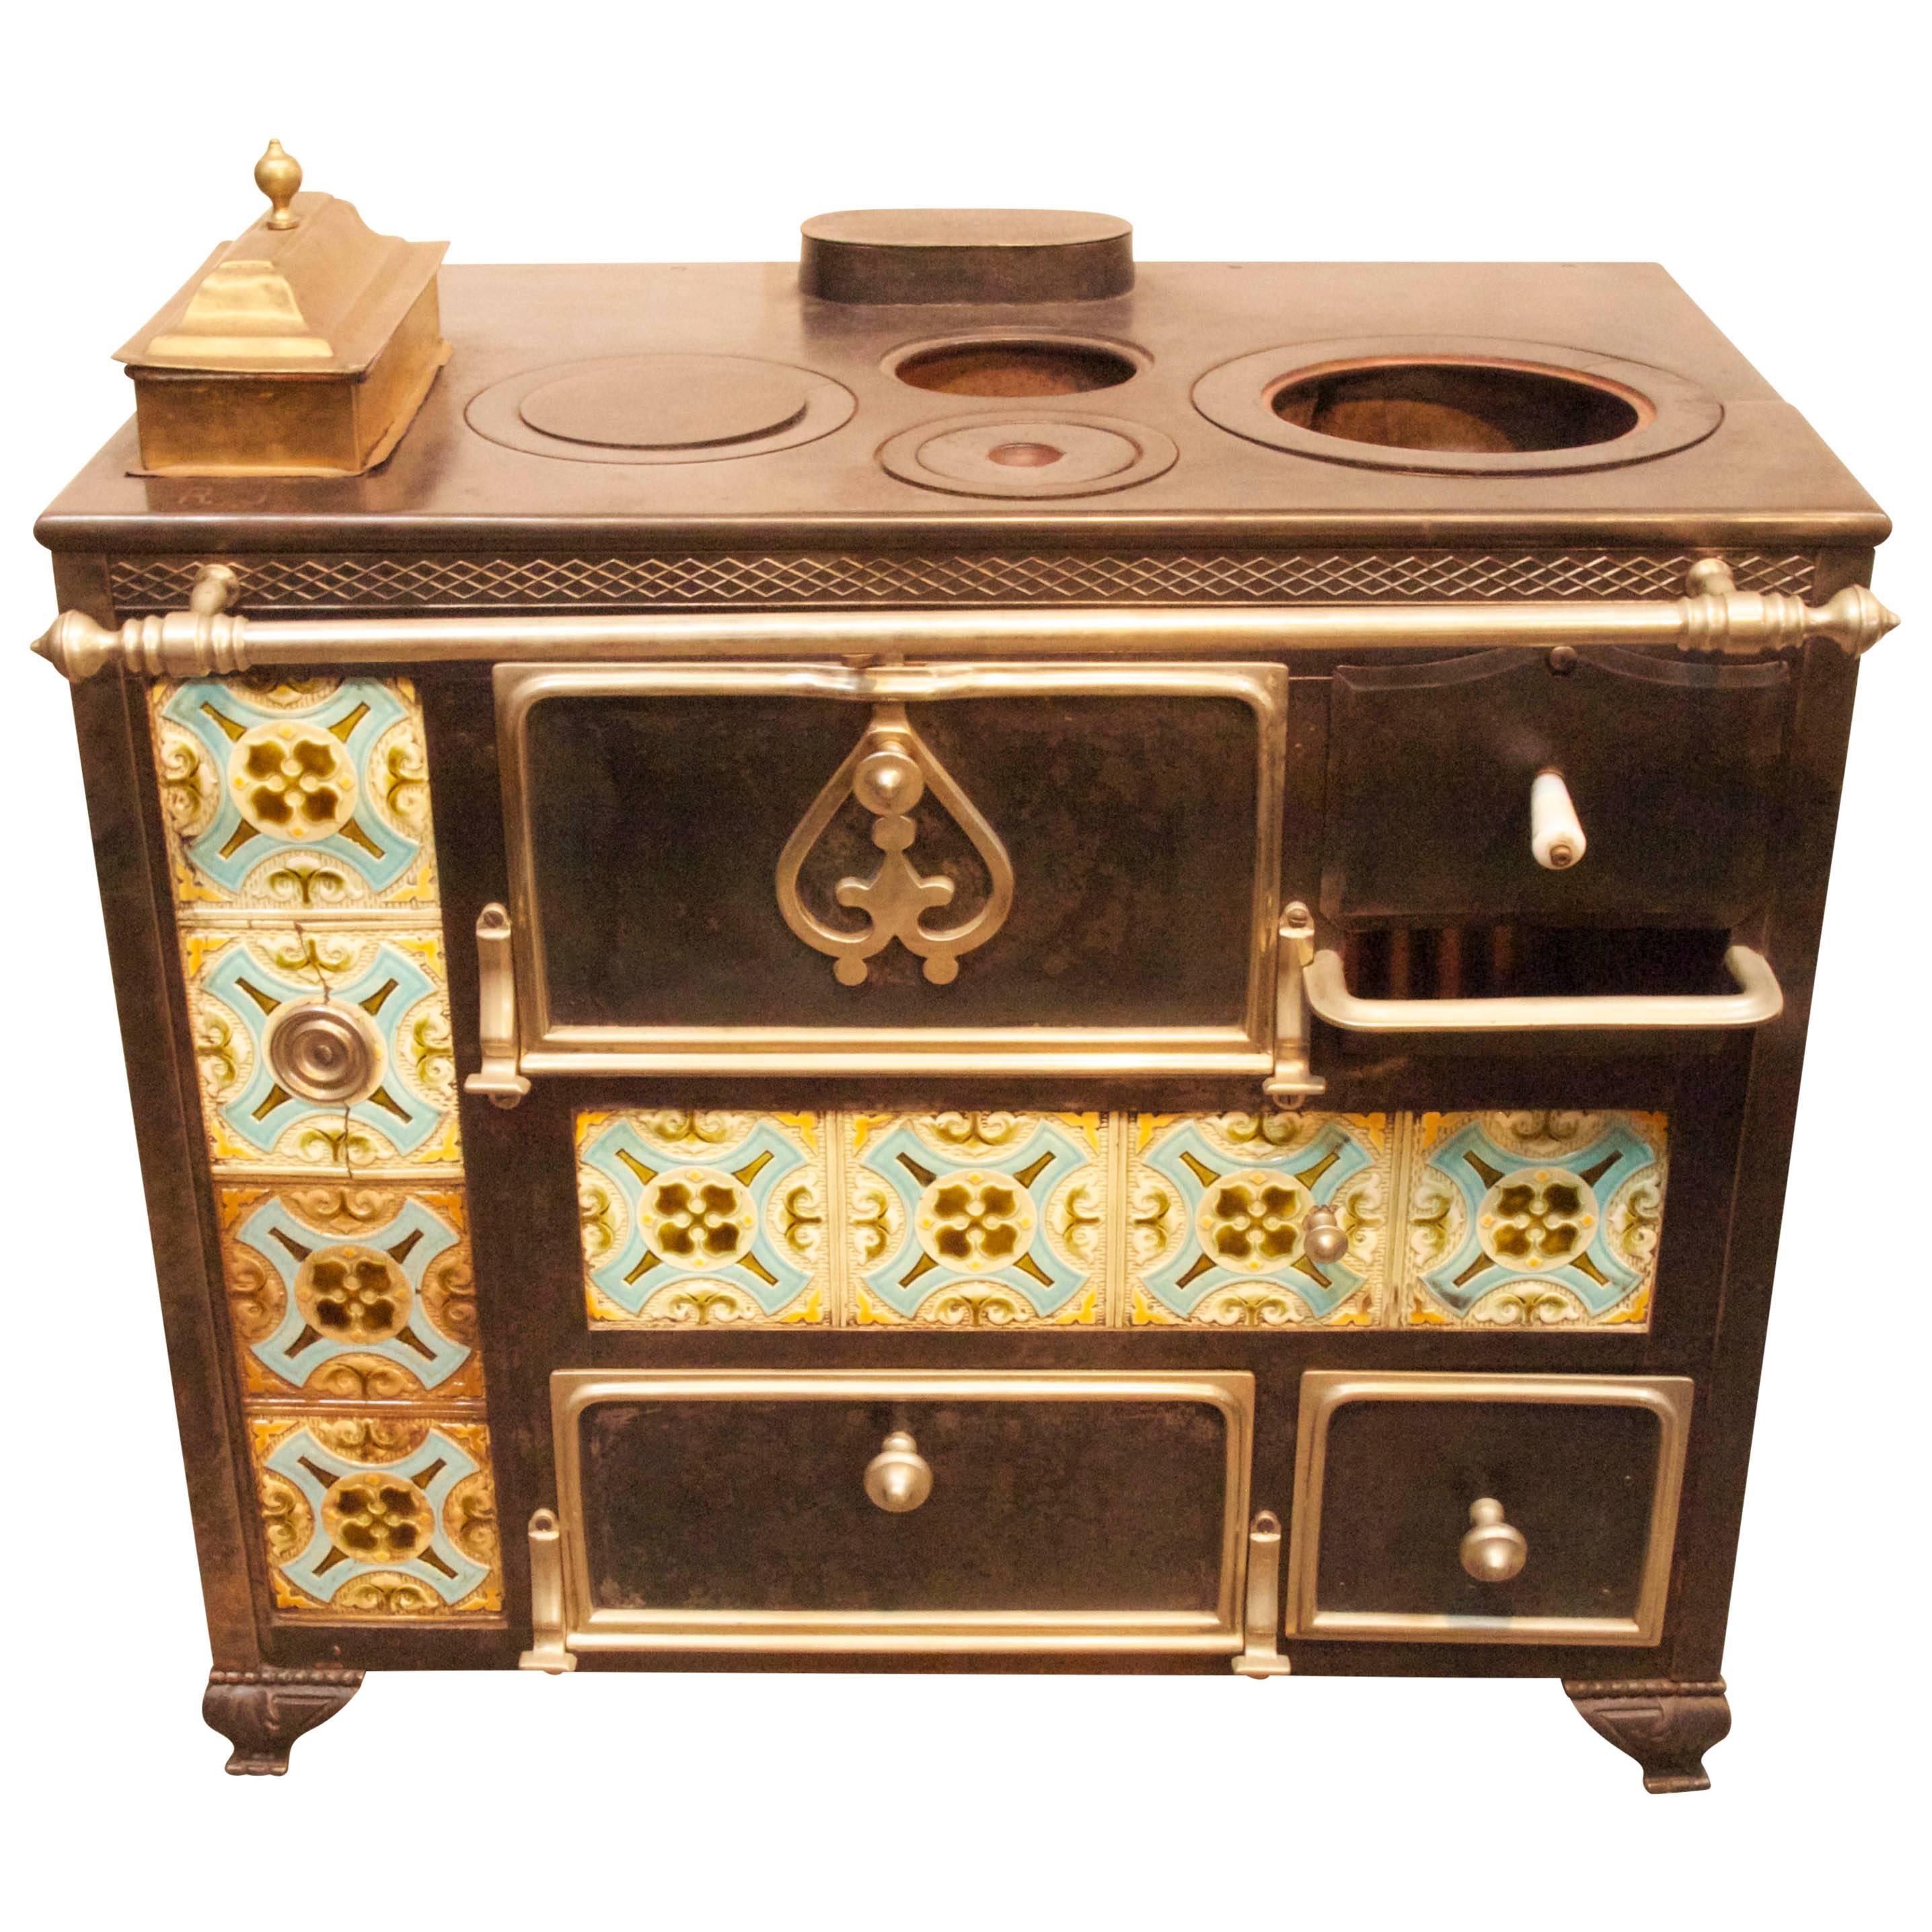 Early 19th Century French Cooking Stove